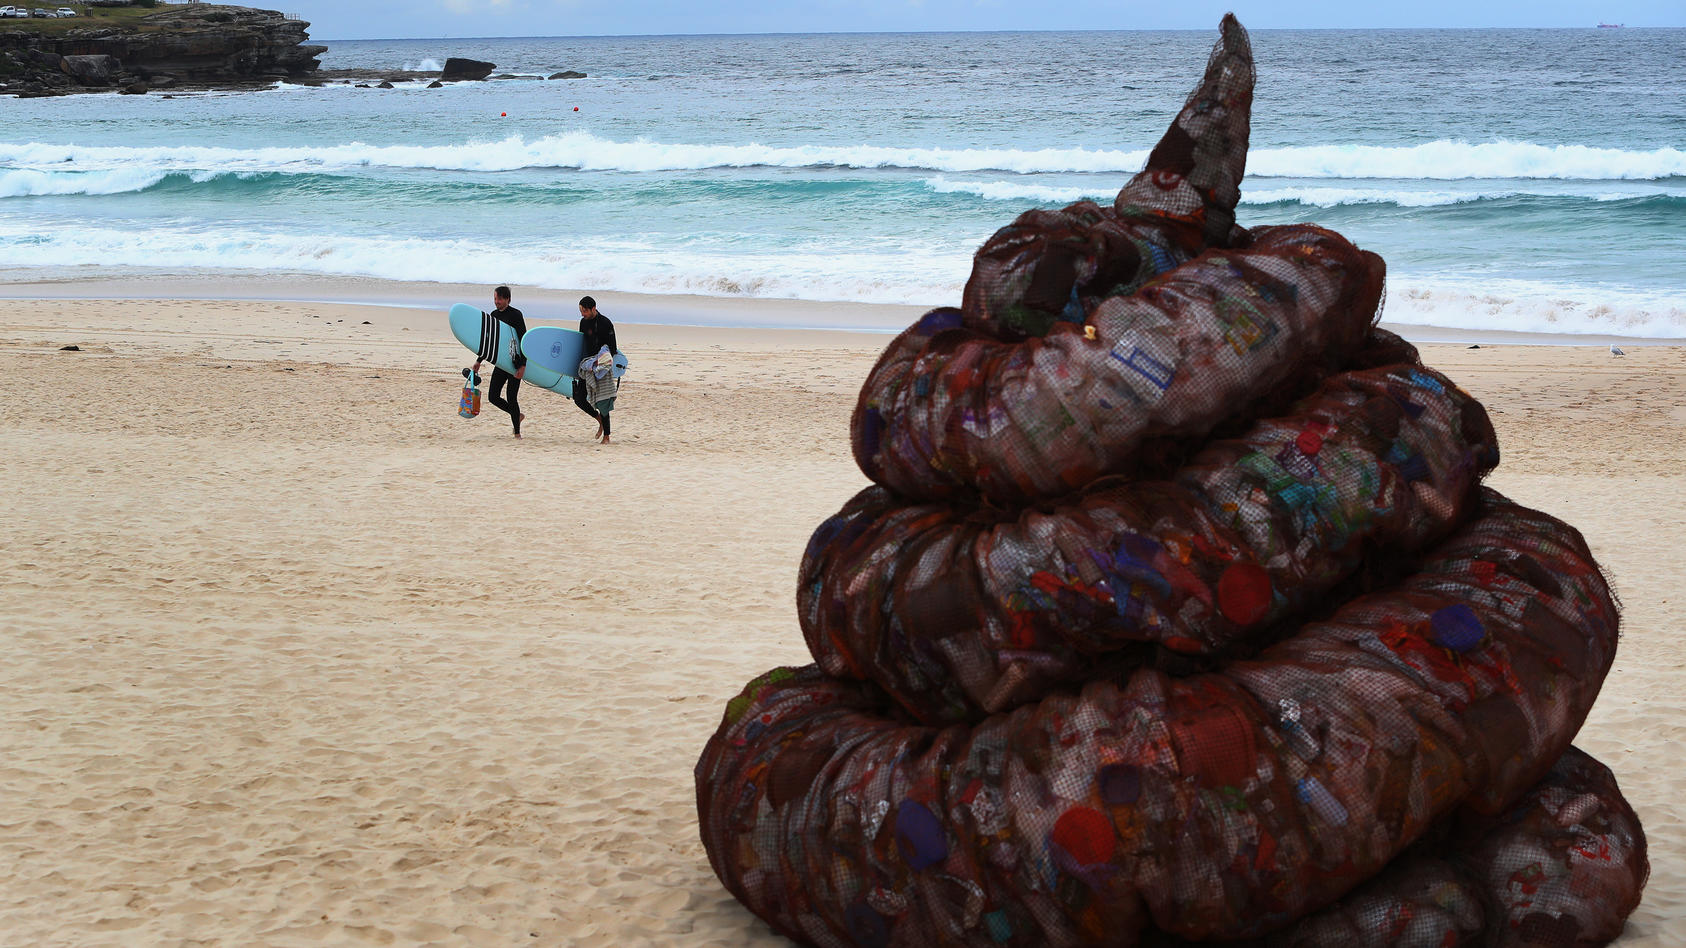 SYDNEY, AUSTRALIA - JUNE 05: A sculpture titled 'Plastic pile of sh!t, 2023' presented by Better Packaging Co. is seen on display at Bondi Beach on June 05, 2023 in Sydney, Australia. The four-metre-high sculpture is made out of recycled plastic and 